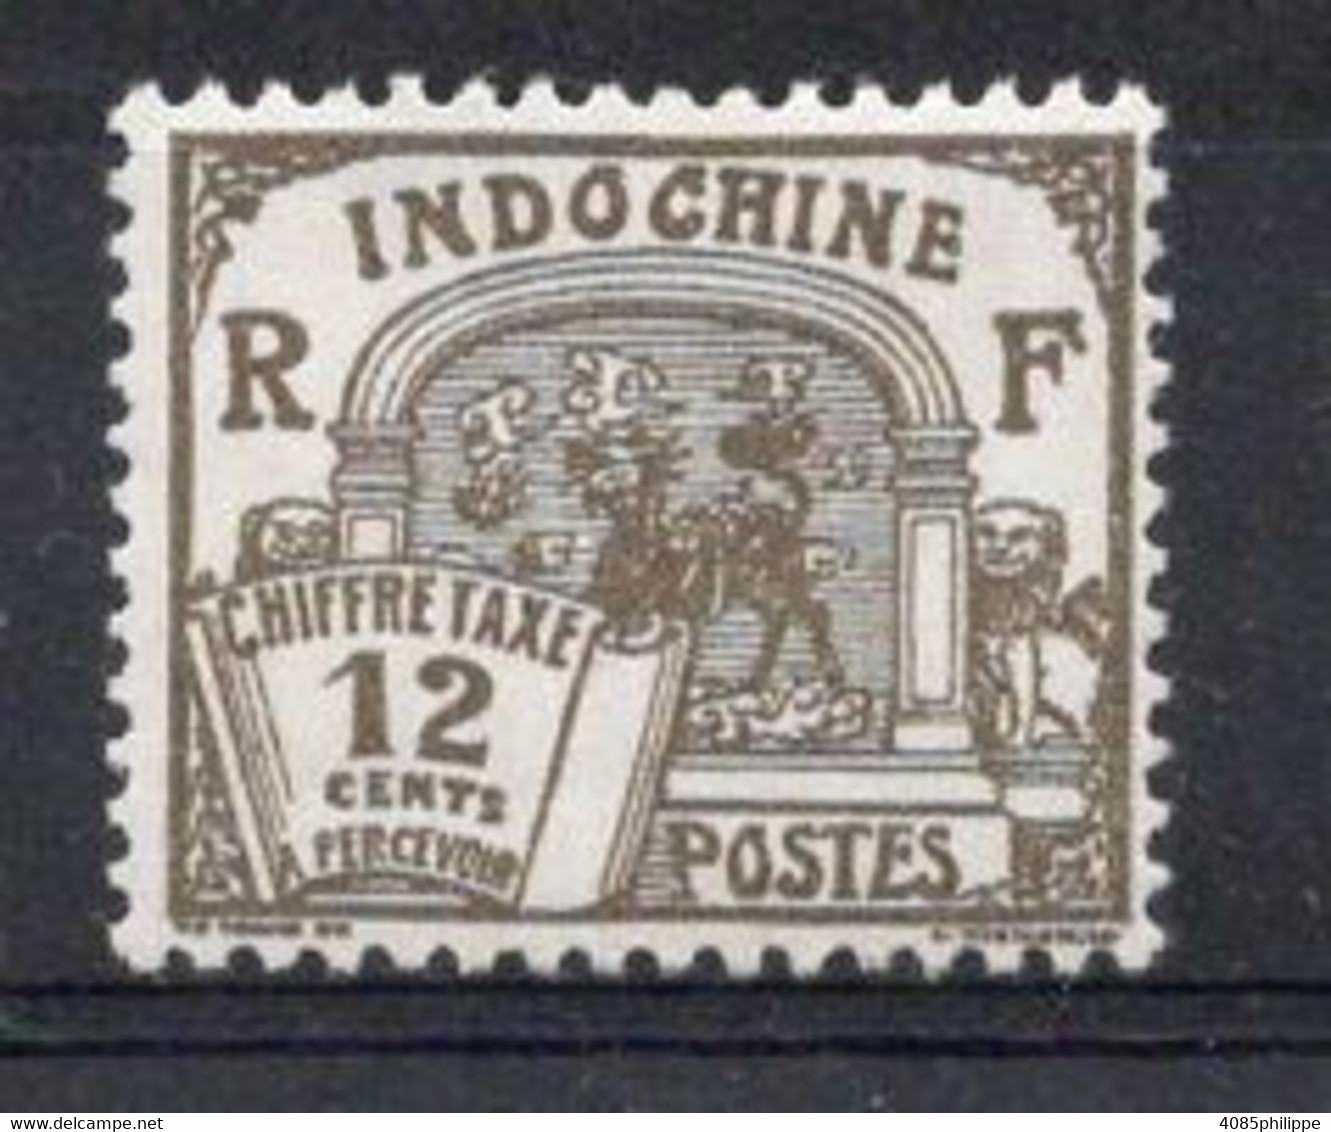 INDOCHINE Timbre Taxe N°53* Neuf Gomme Tachée Cote 7€00 - Postage Due